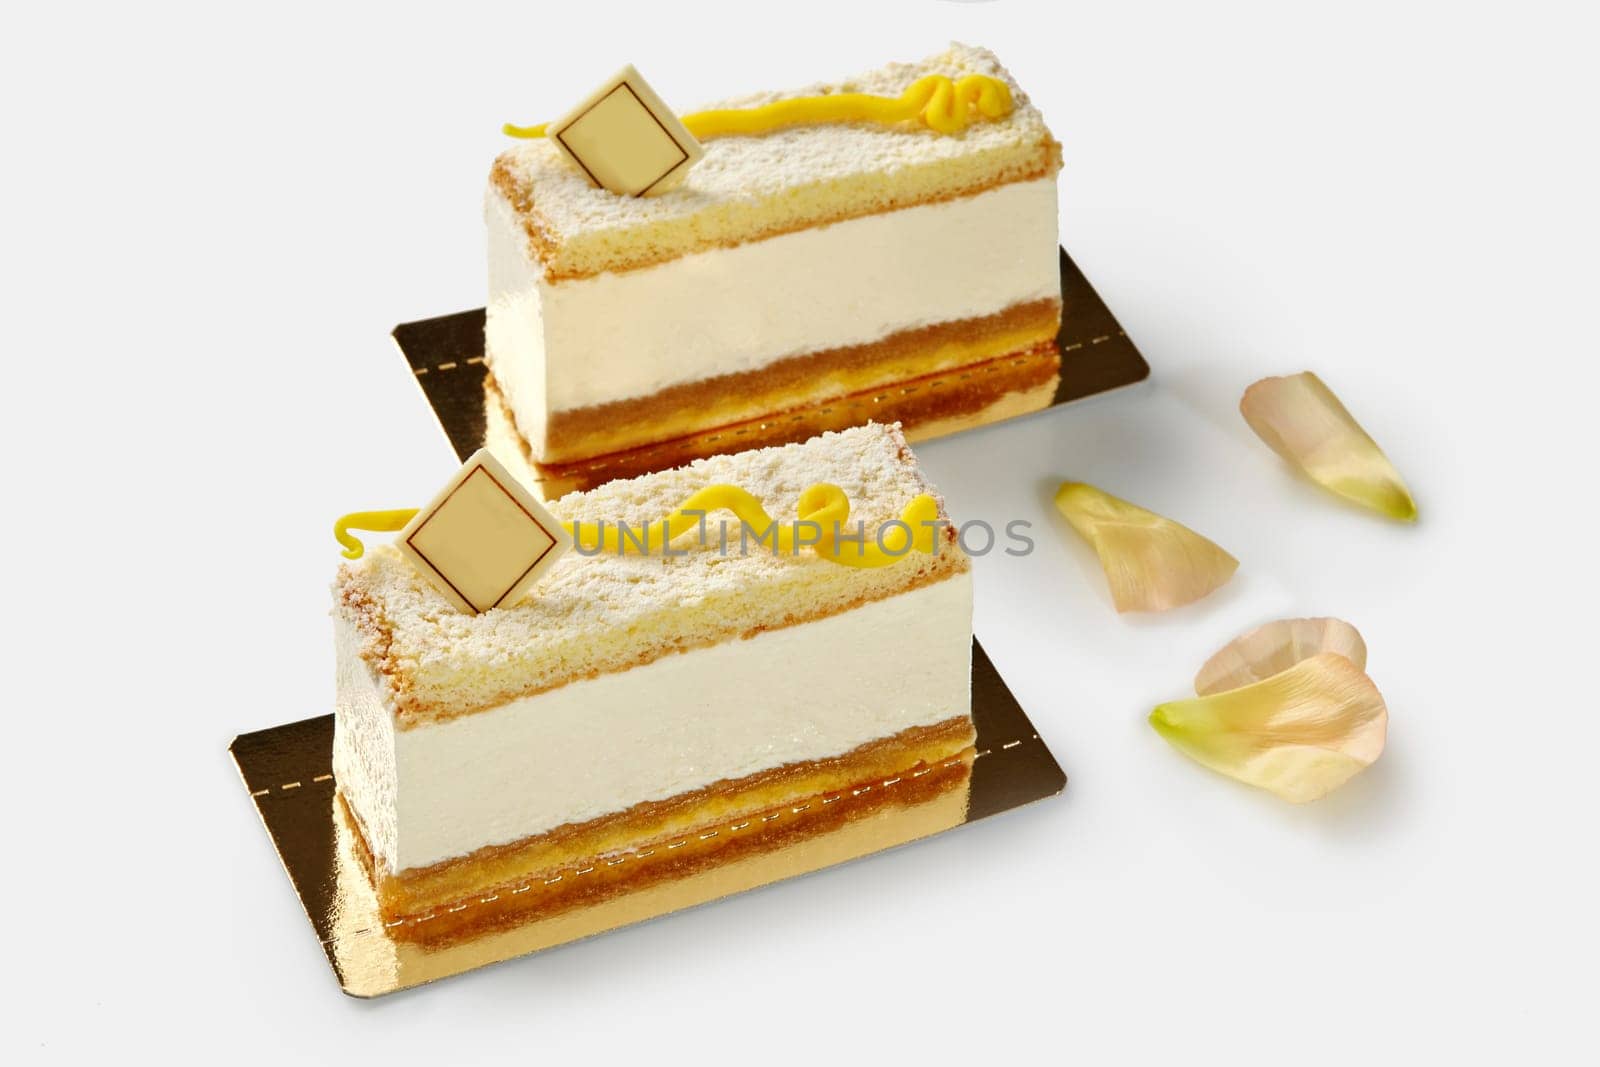 Slices of tempting birds milk sponge cake filled with airy creamy souffle decorated with signature chocolate plaque and yellow mastic swirl, on white background with flower petals